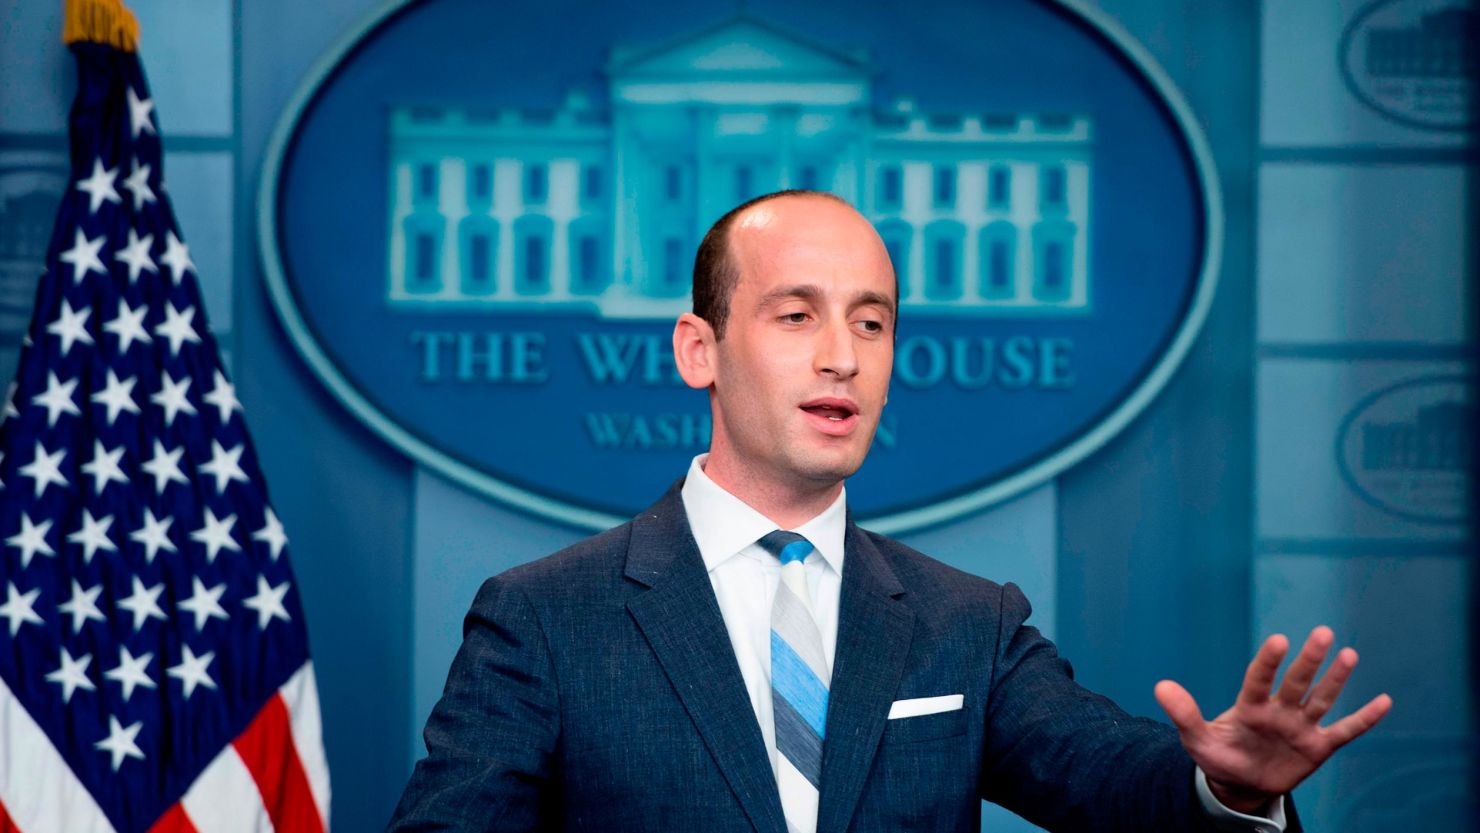 President Donald Trump's senior adviser for policy Stephen Miller, speaks during the Daily Briefing at the White House on August 2, 2017.